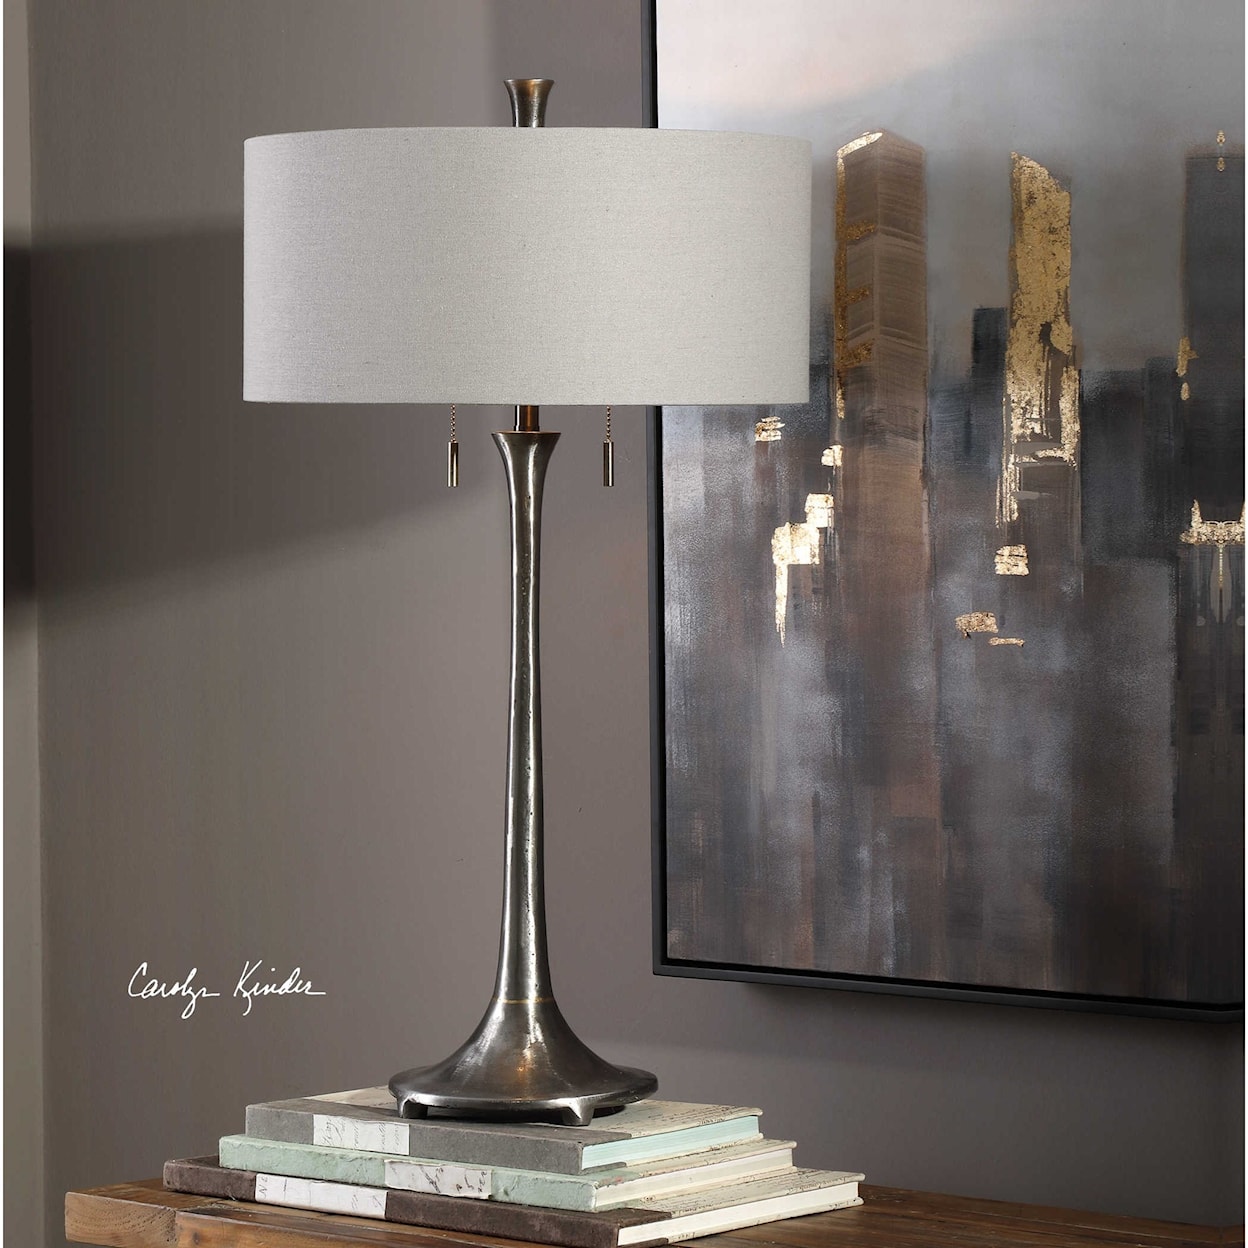 Uttermost Table Lamps Aliso Table Lamp